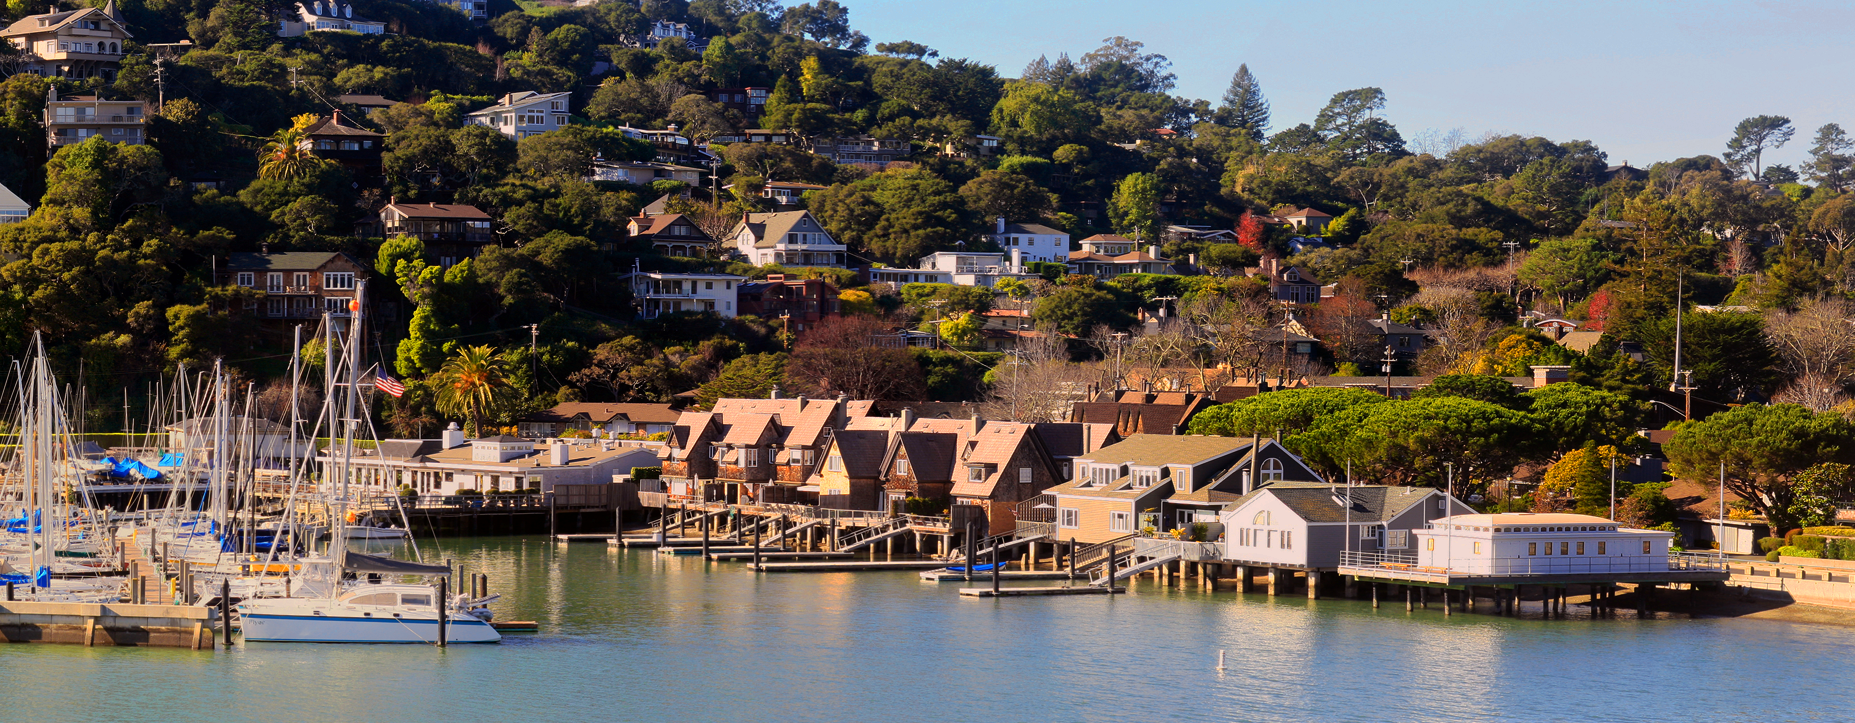 Waterside photo of Belvedere in Marin County for Bay Leaves local cannabis delivery service